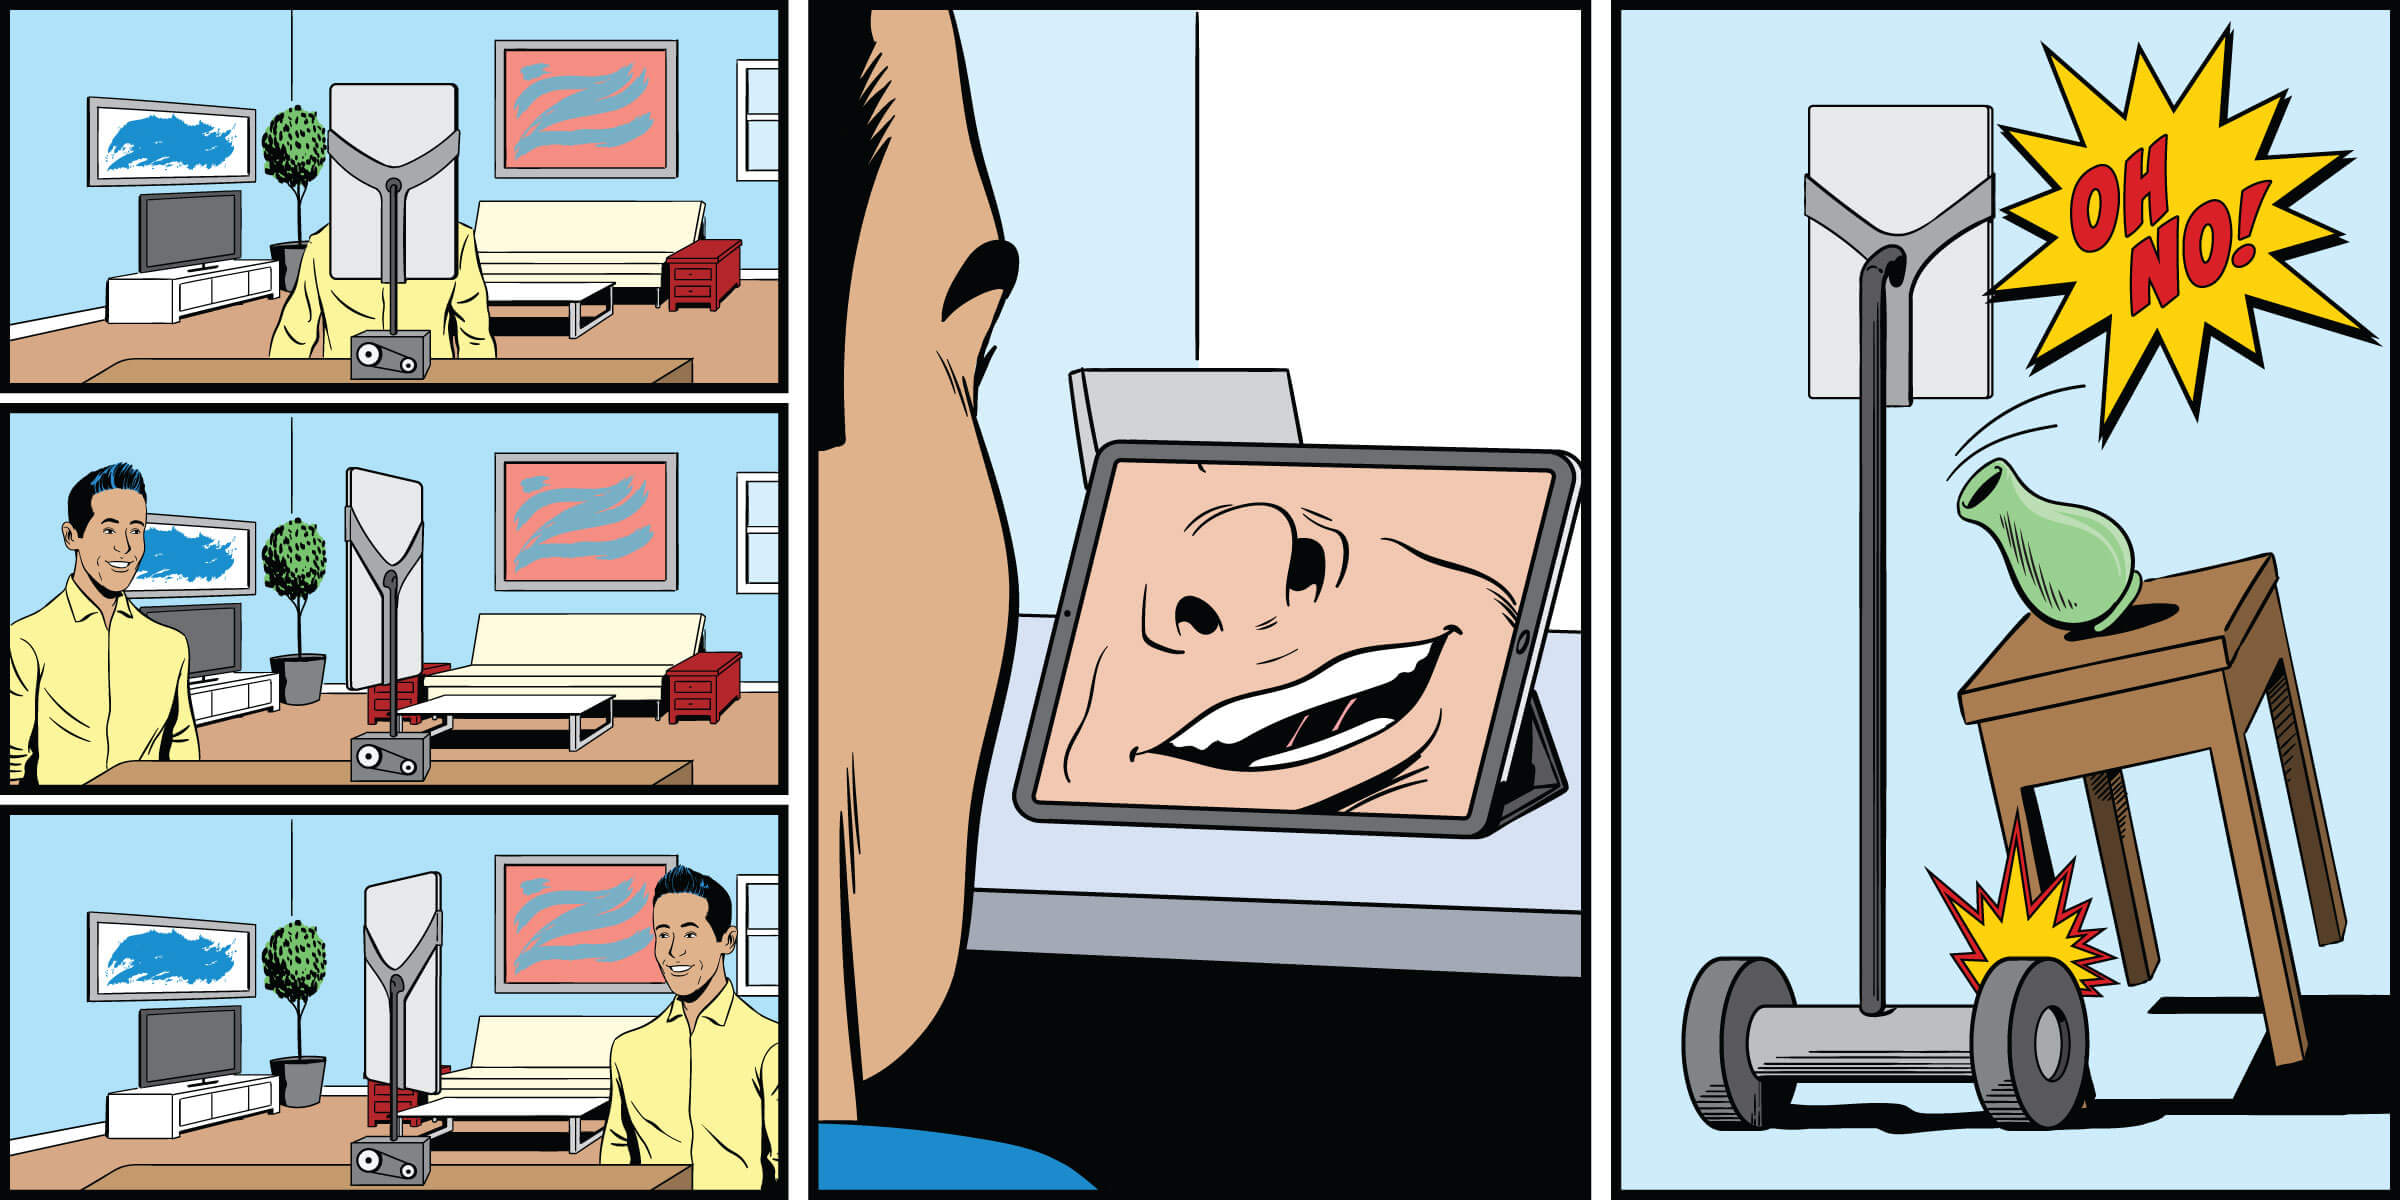 A pop comic illustration of a man interacting with a tablet in comedic ways.